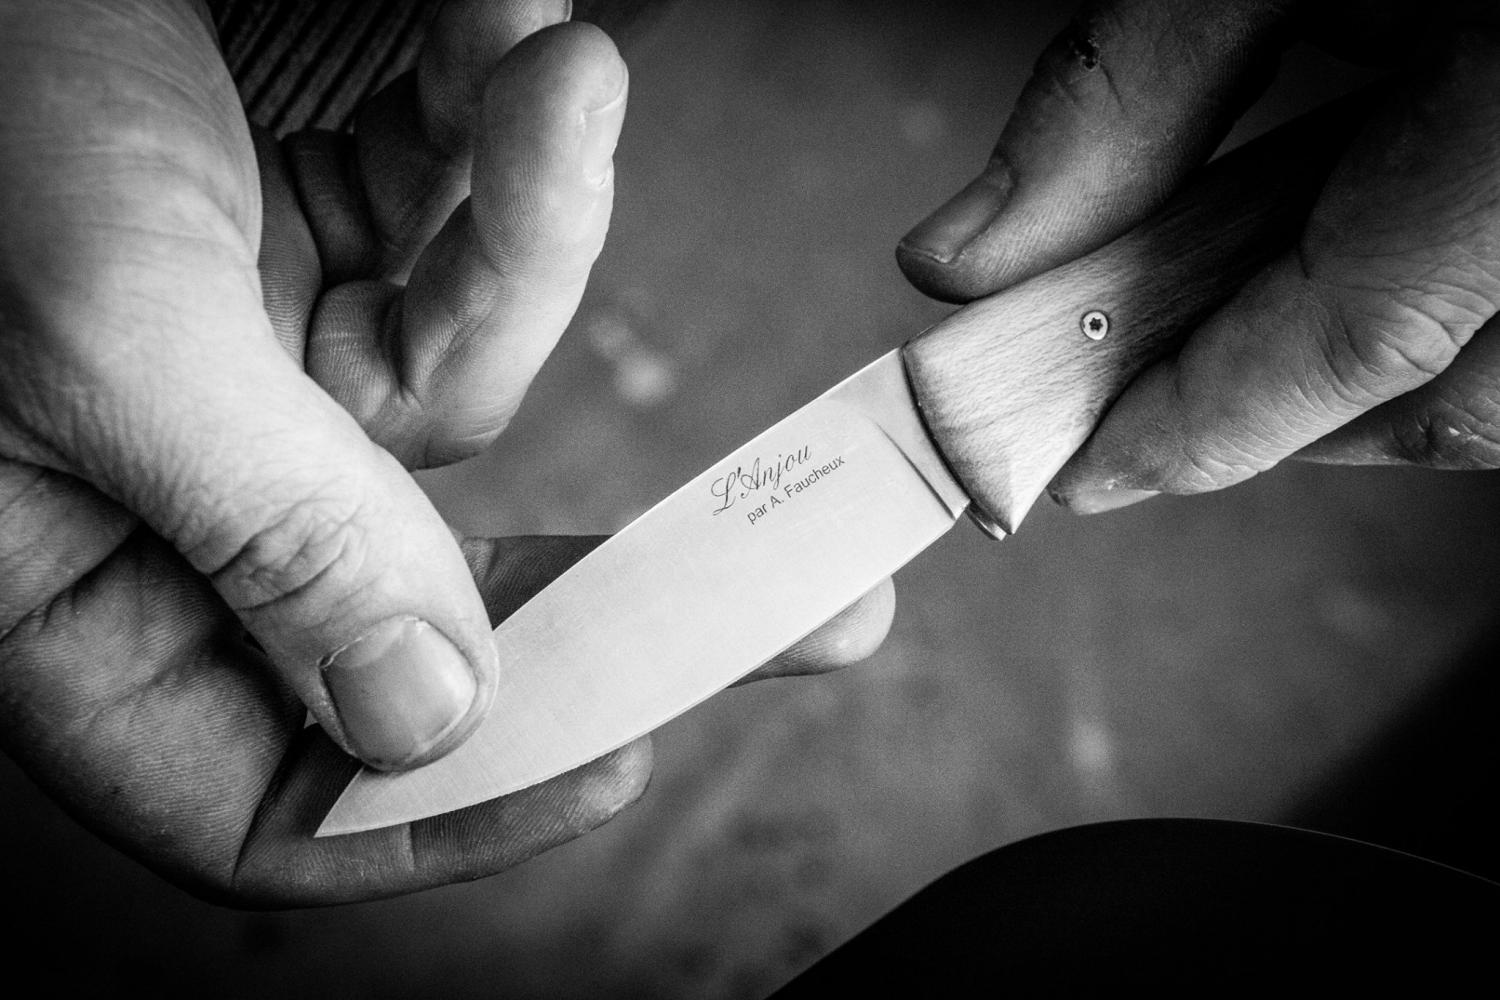 Cutlery workshop: Creating your own knife